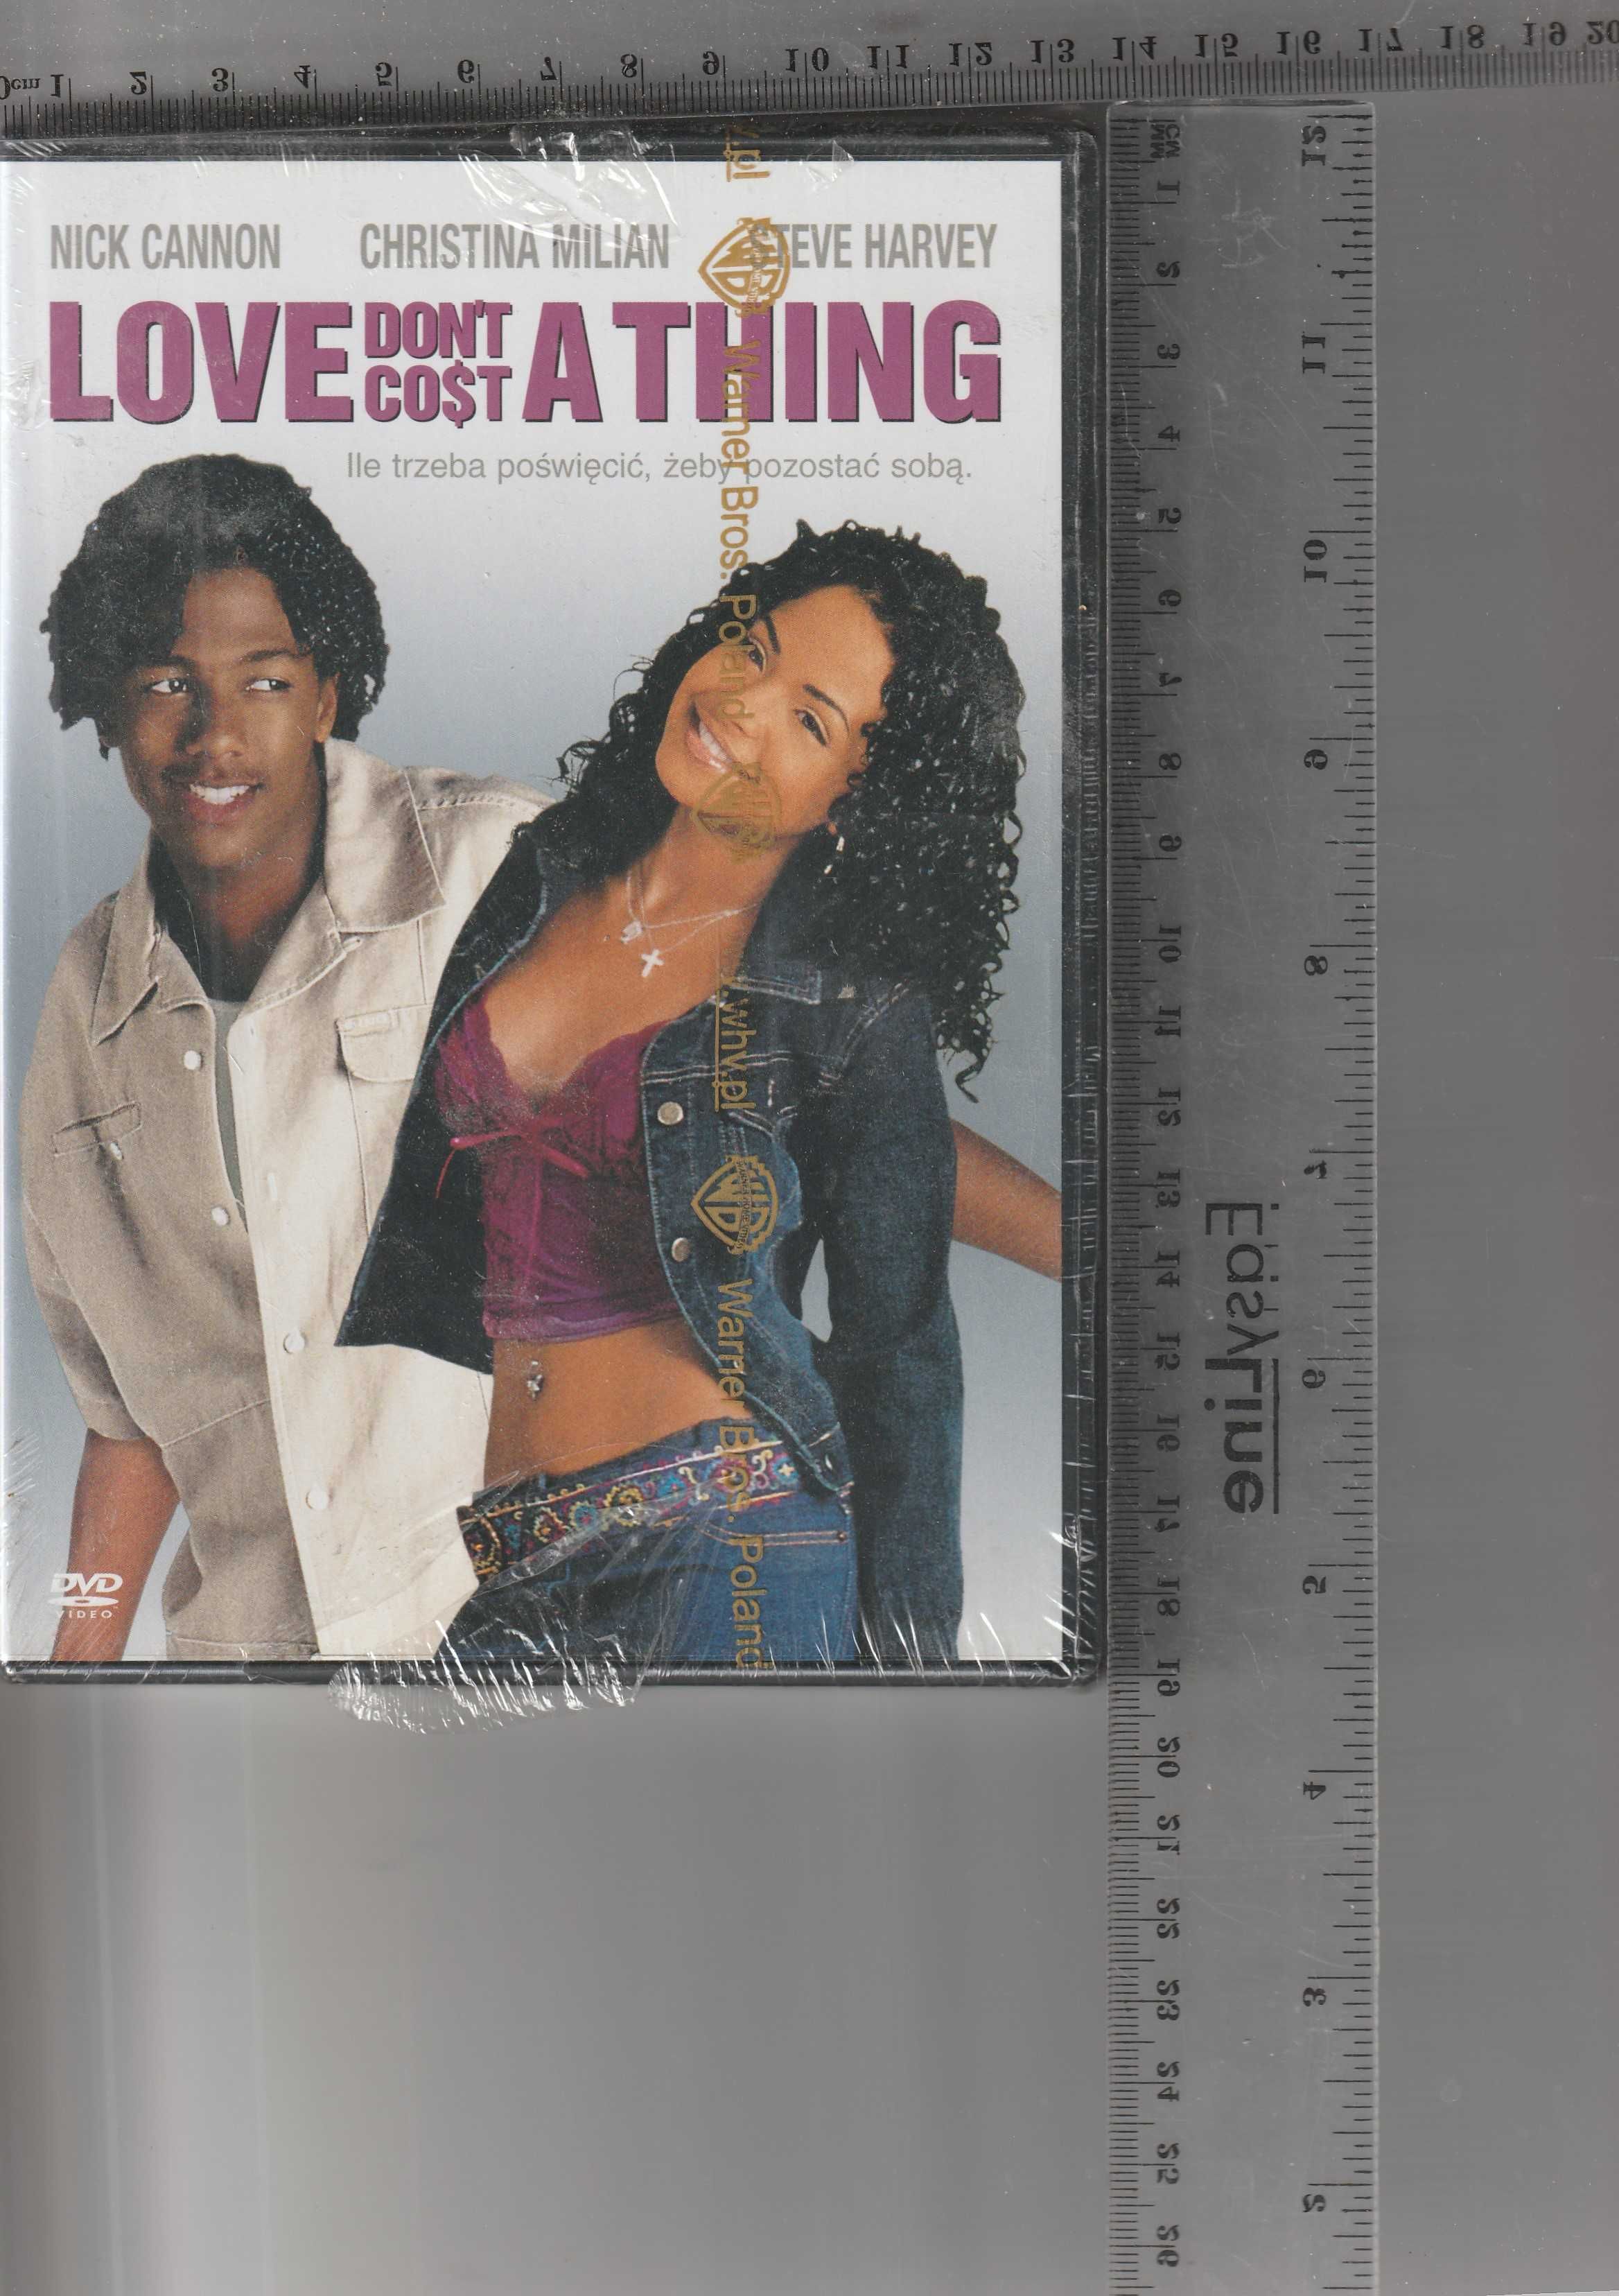 Love don't cost a thing Nick Cannon Christiana Milian DVD